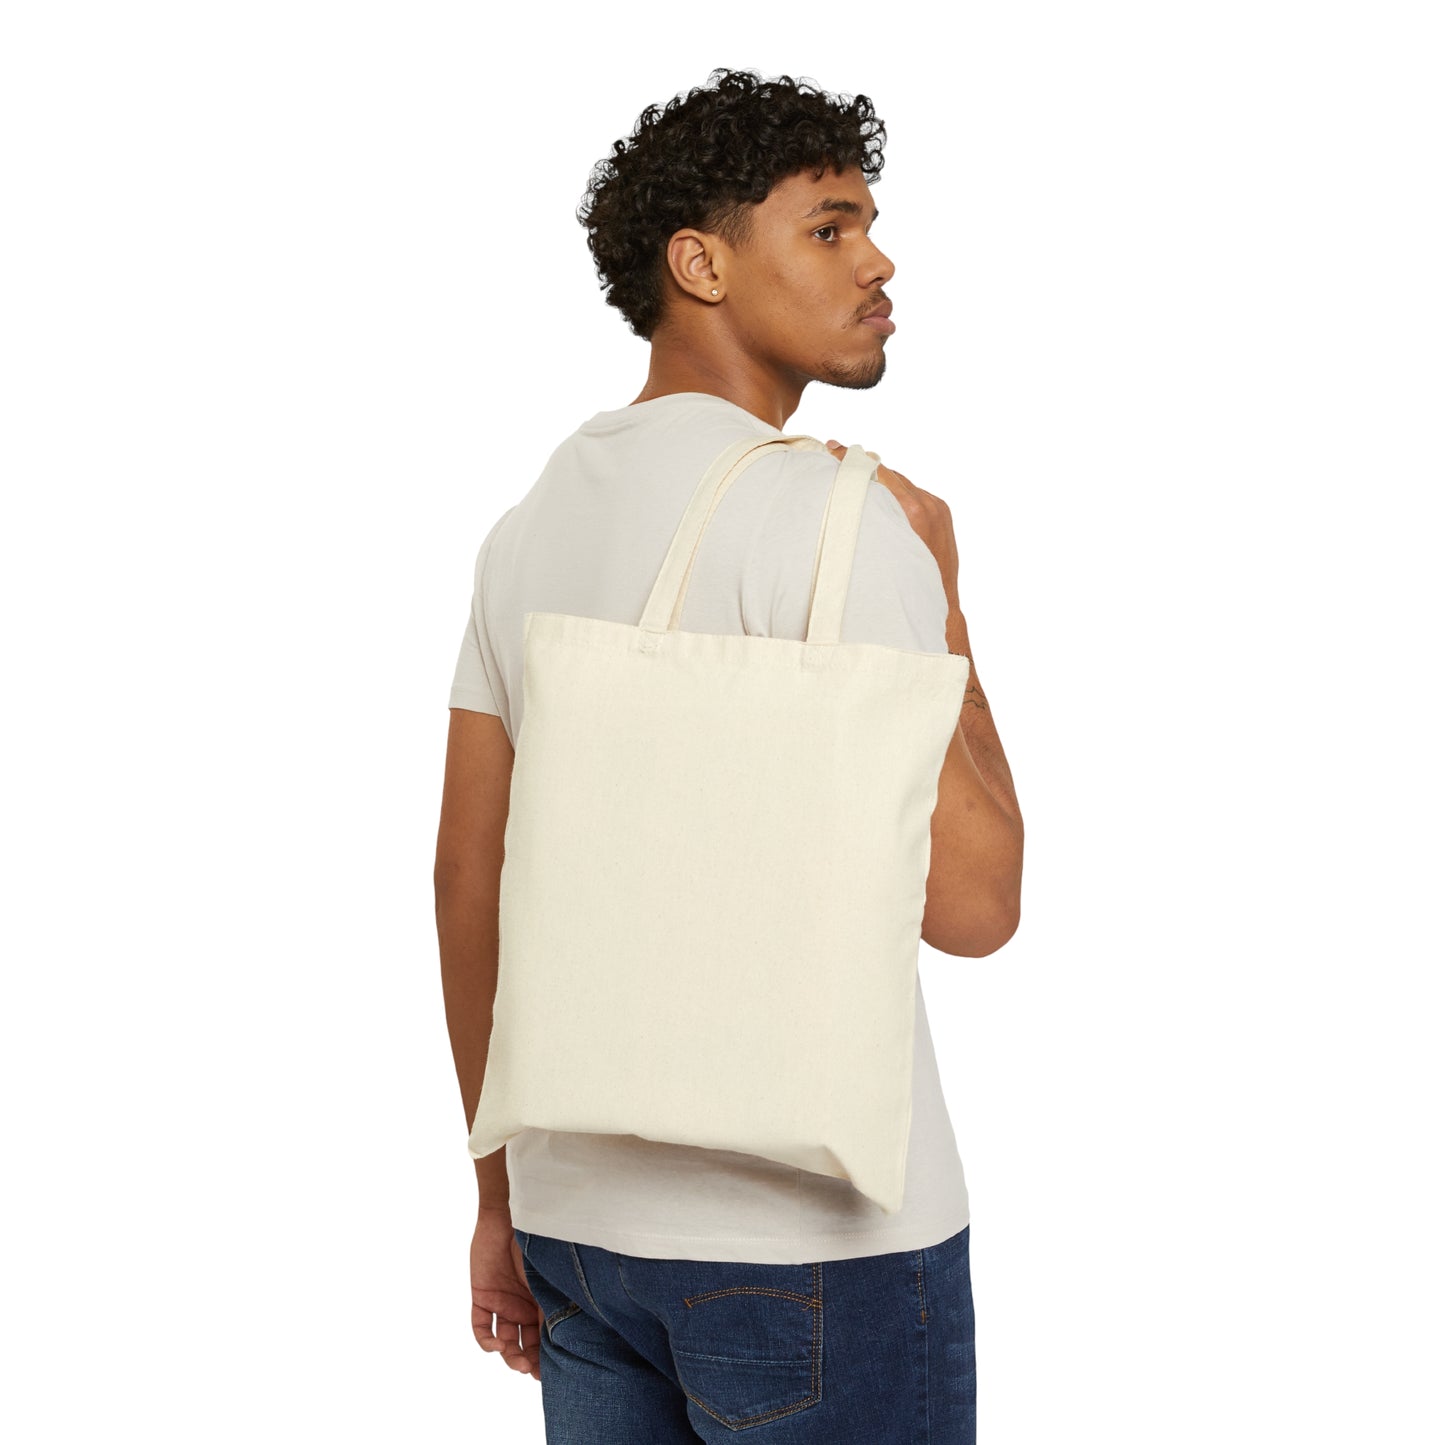 “The Pinnacle of Desire” Cotton Canvas Tote